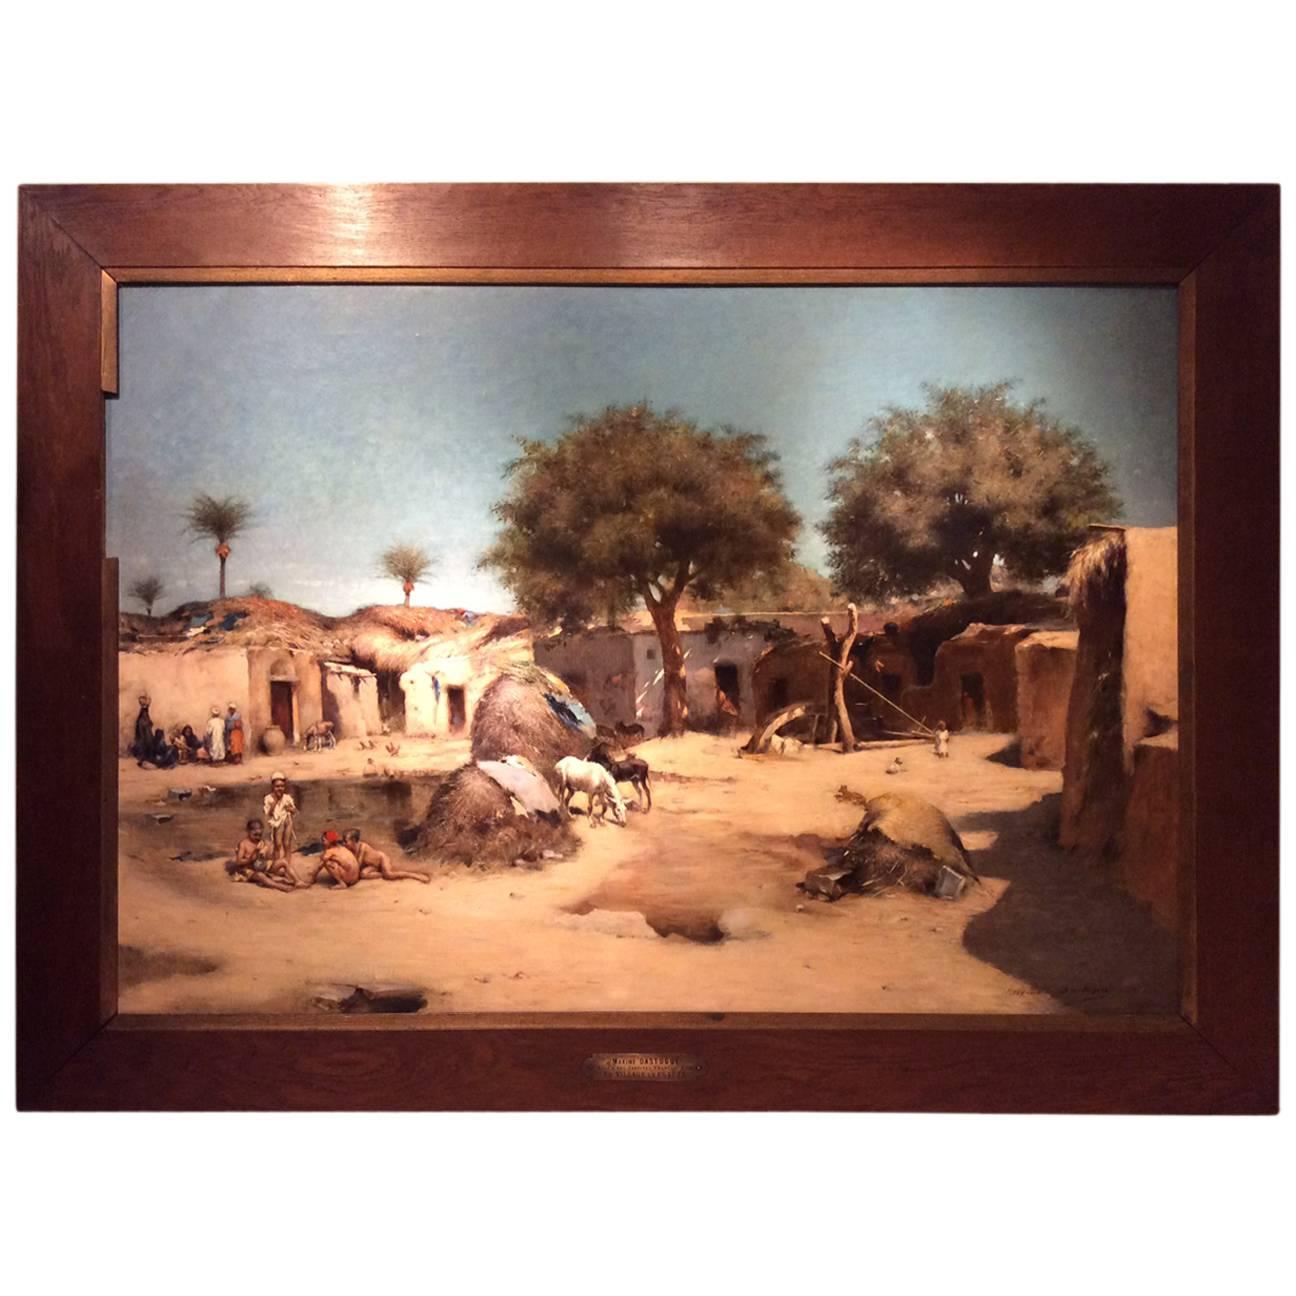 Village in Egypt, Large Painting Signed Maxime Dastugue (1851-1909)